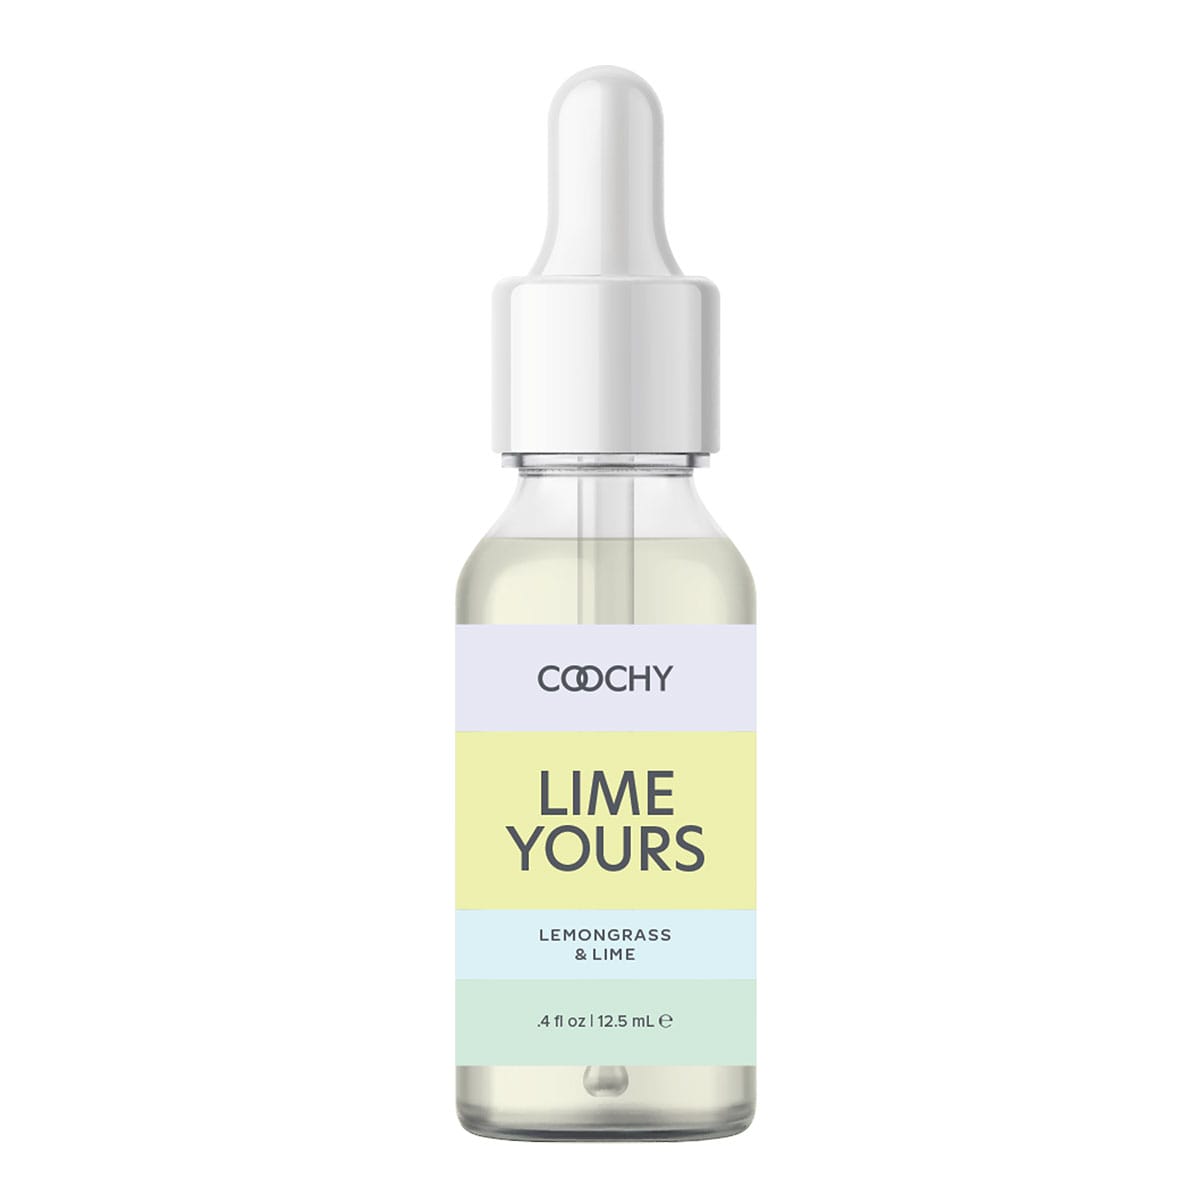 Buy Coochy Ultra Lime Yours Ingrown Hair Oil 12.5ml   Lemongrass   and  Lime intimate moisturizer for her.